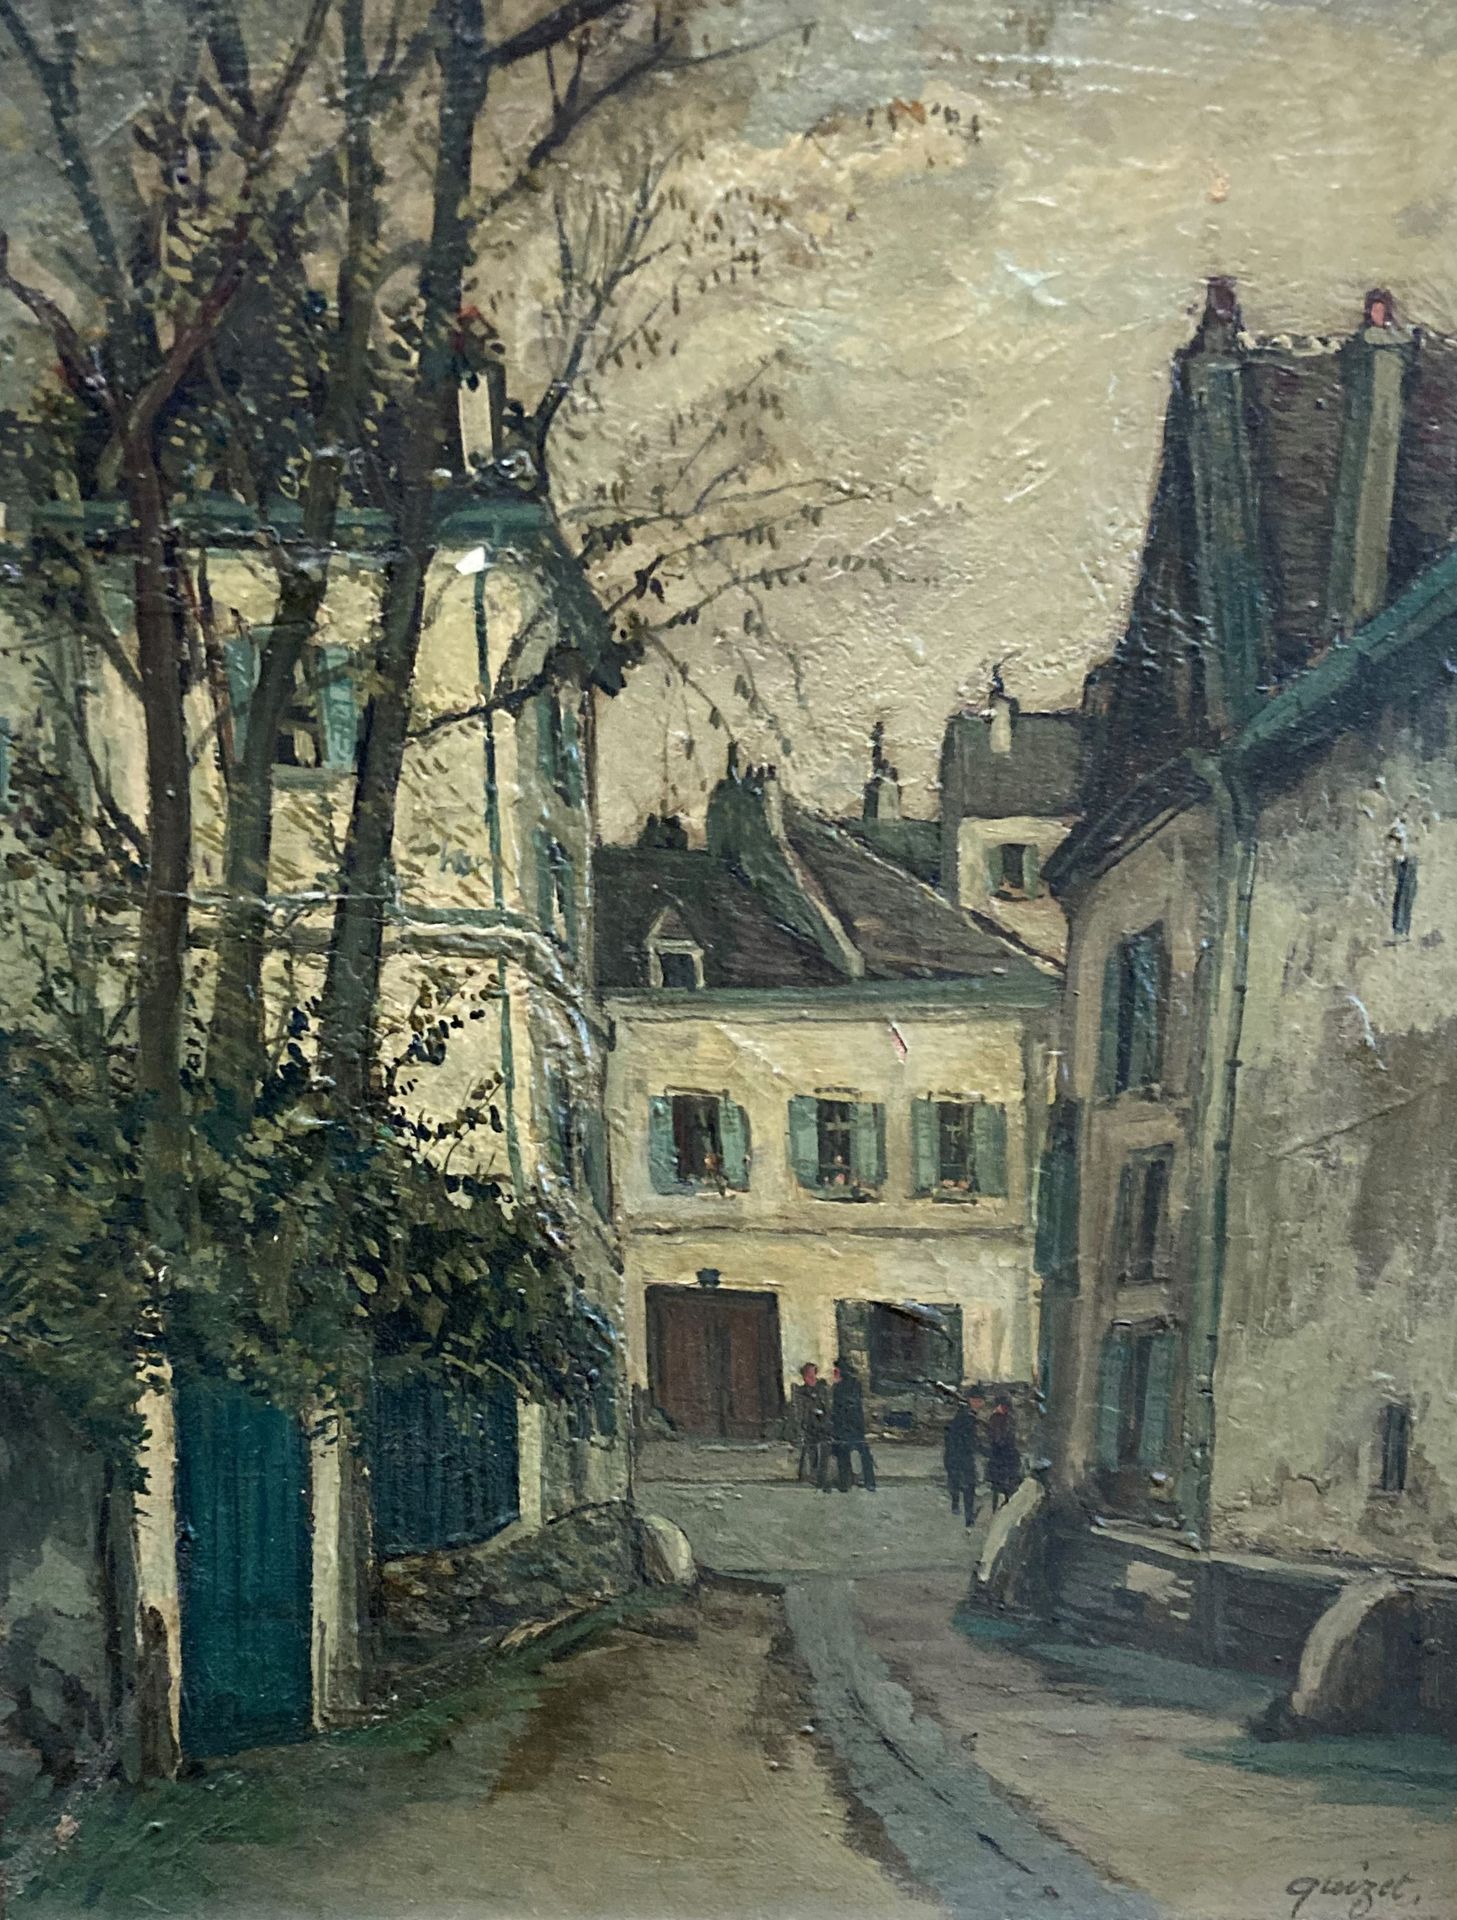 Null Alphonse QUIZET (1885-1955)

Montmartre

Oil on canvas. Signed lower right
&hellip;